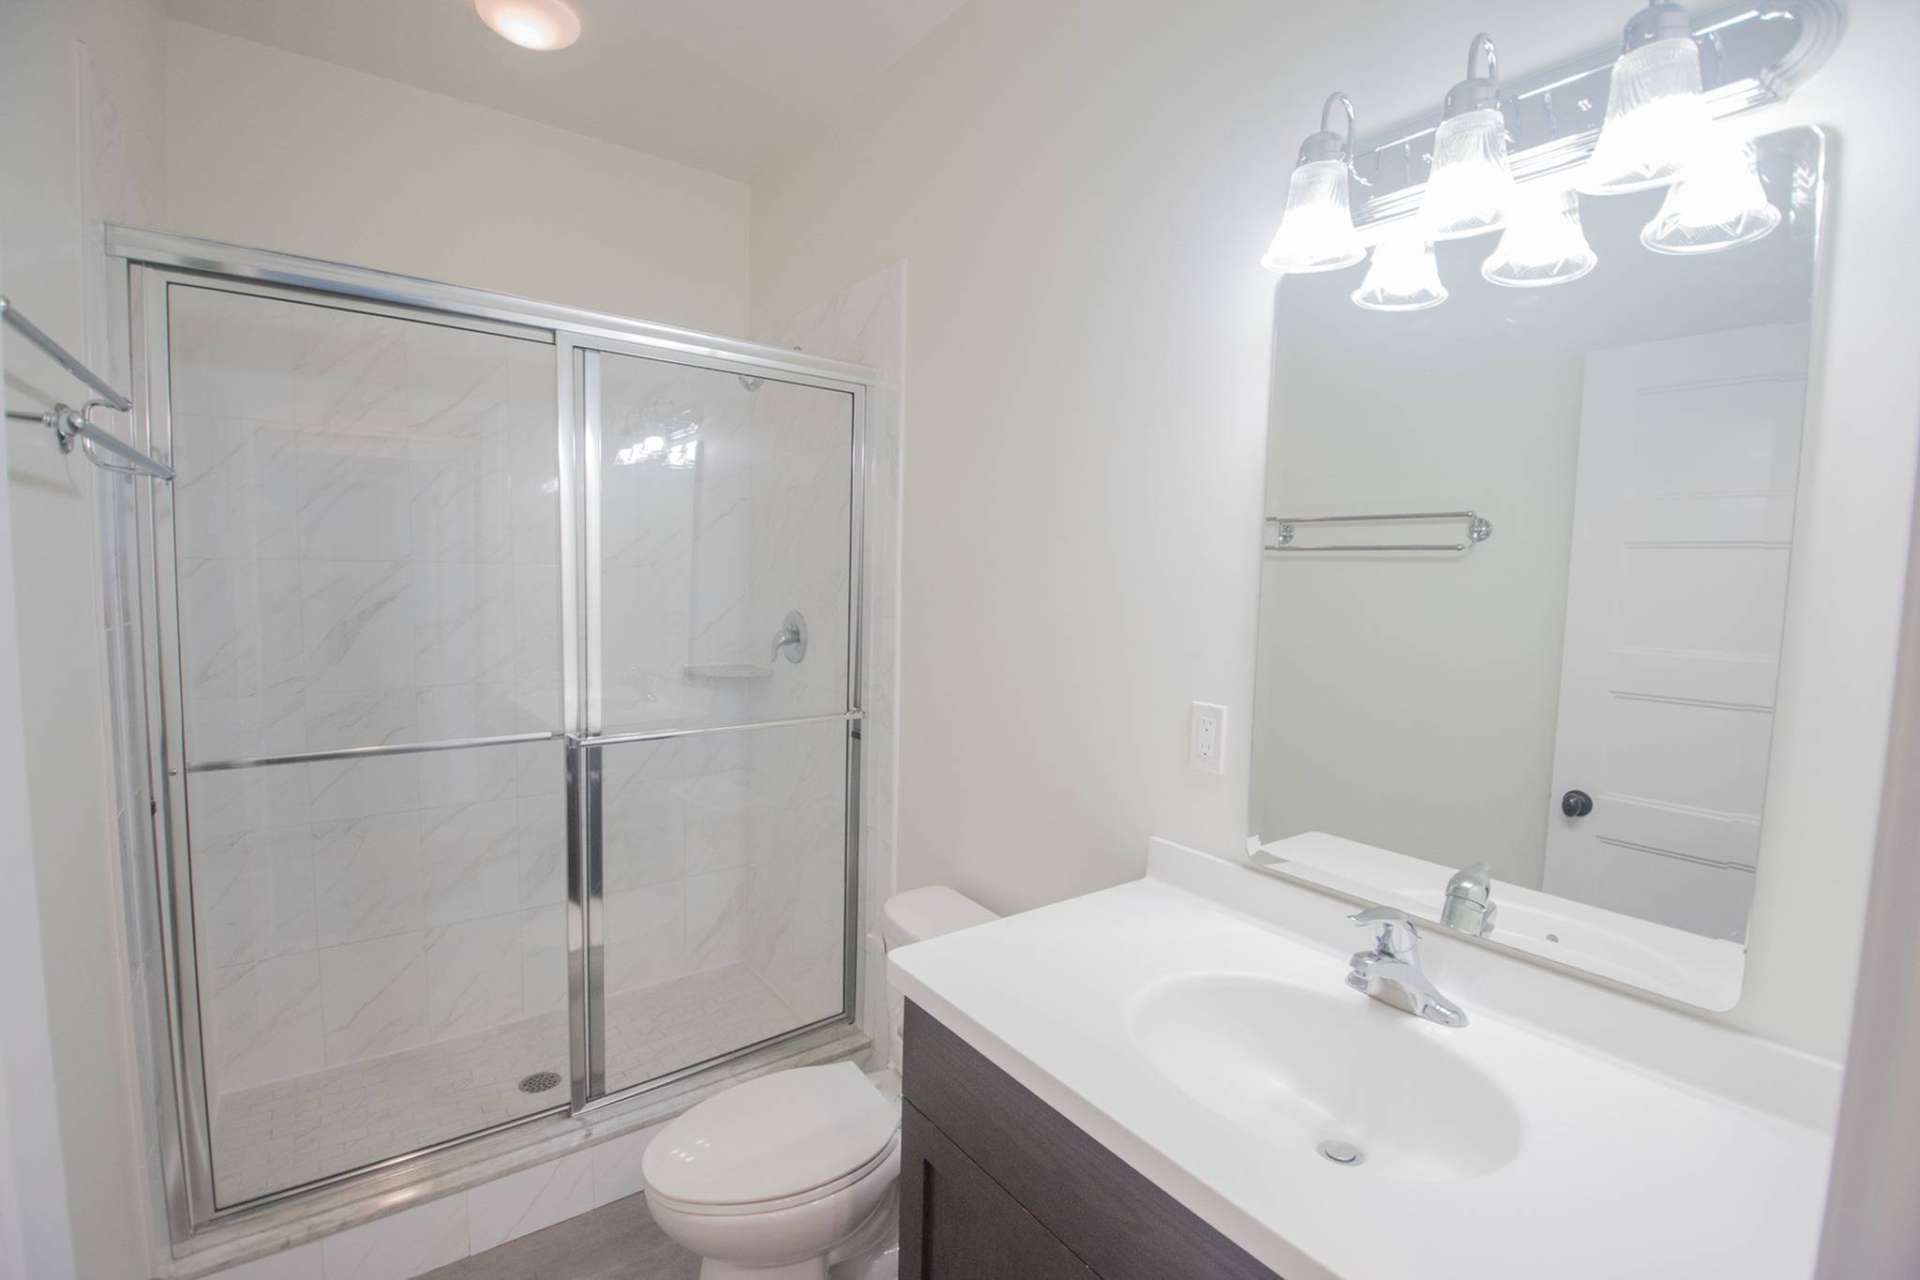 Bathroom with vanity lights, a large mirror, and a sliding glass door to the shower.